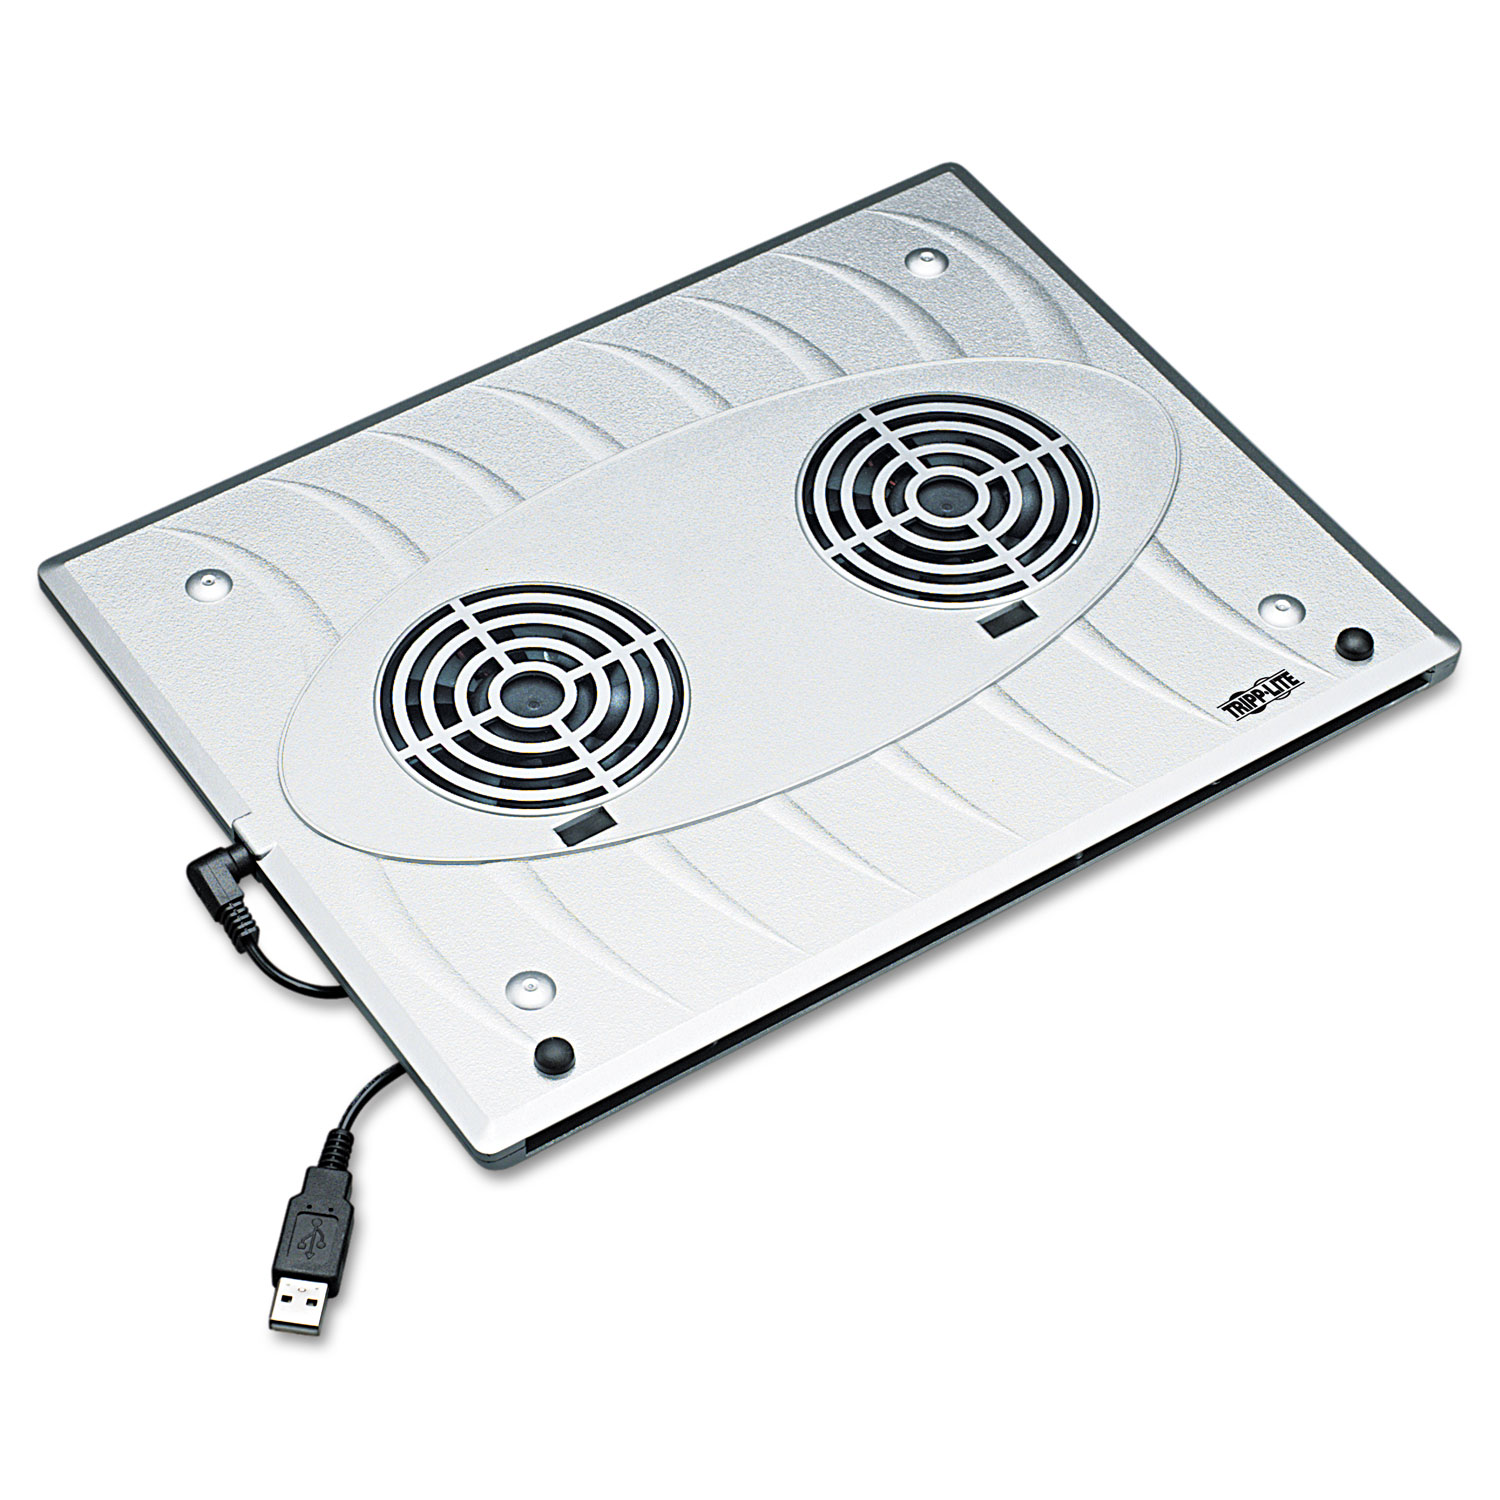 NC2003SR Notebook Cooling Pad, Silver